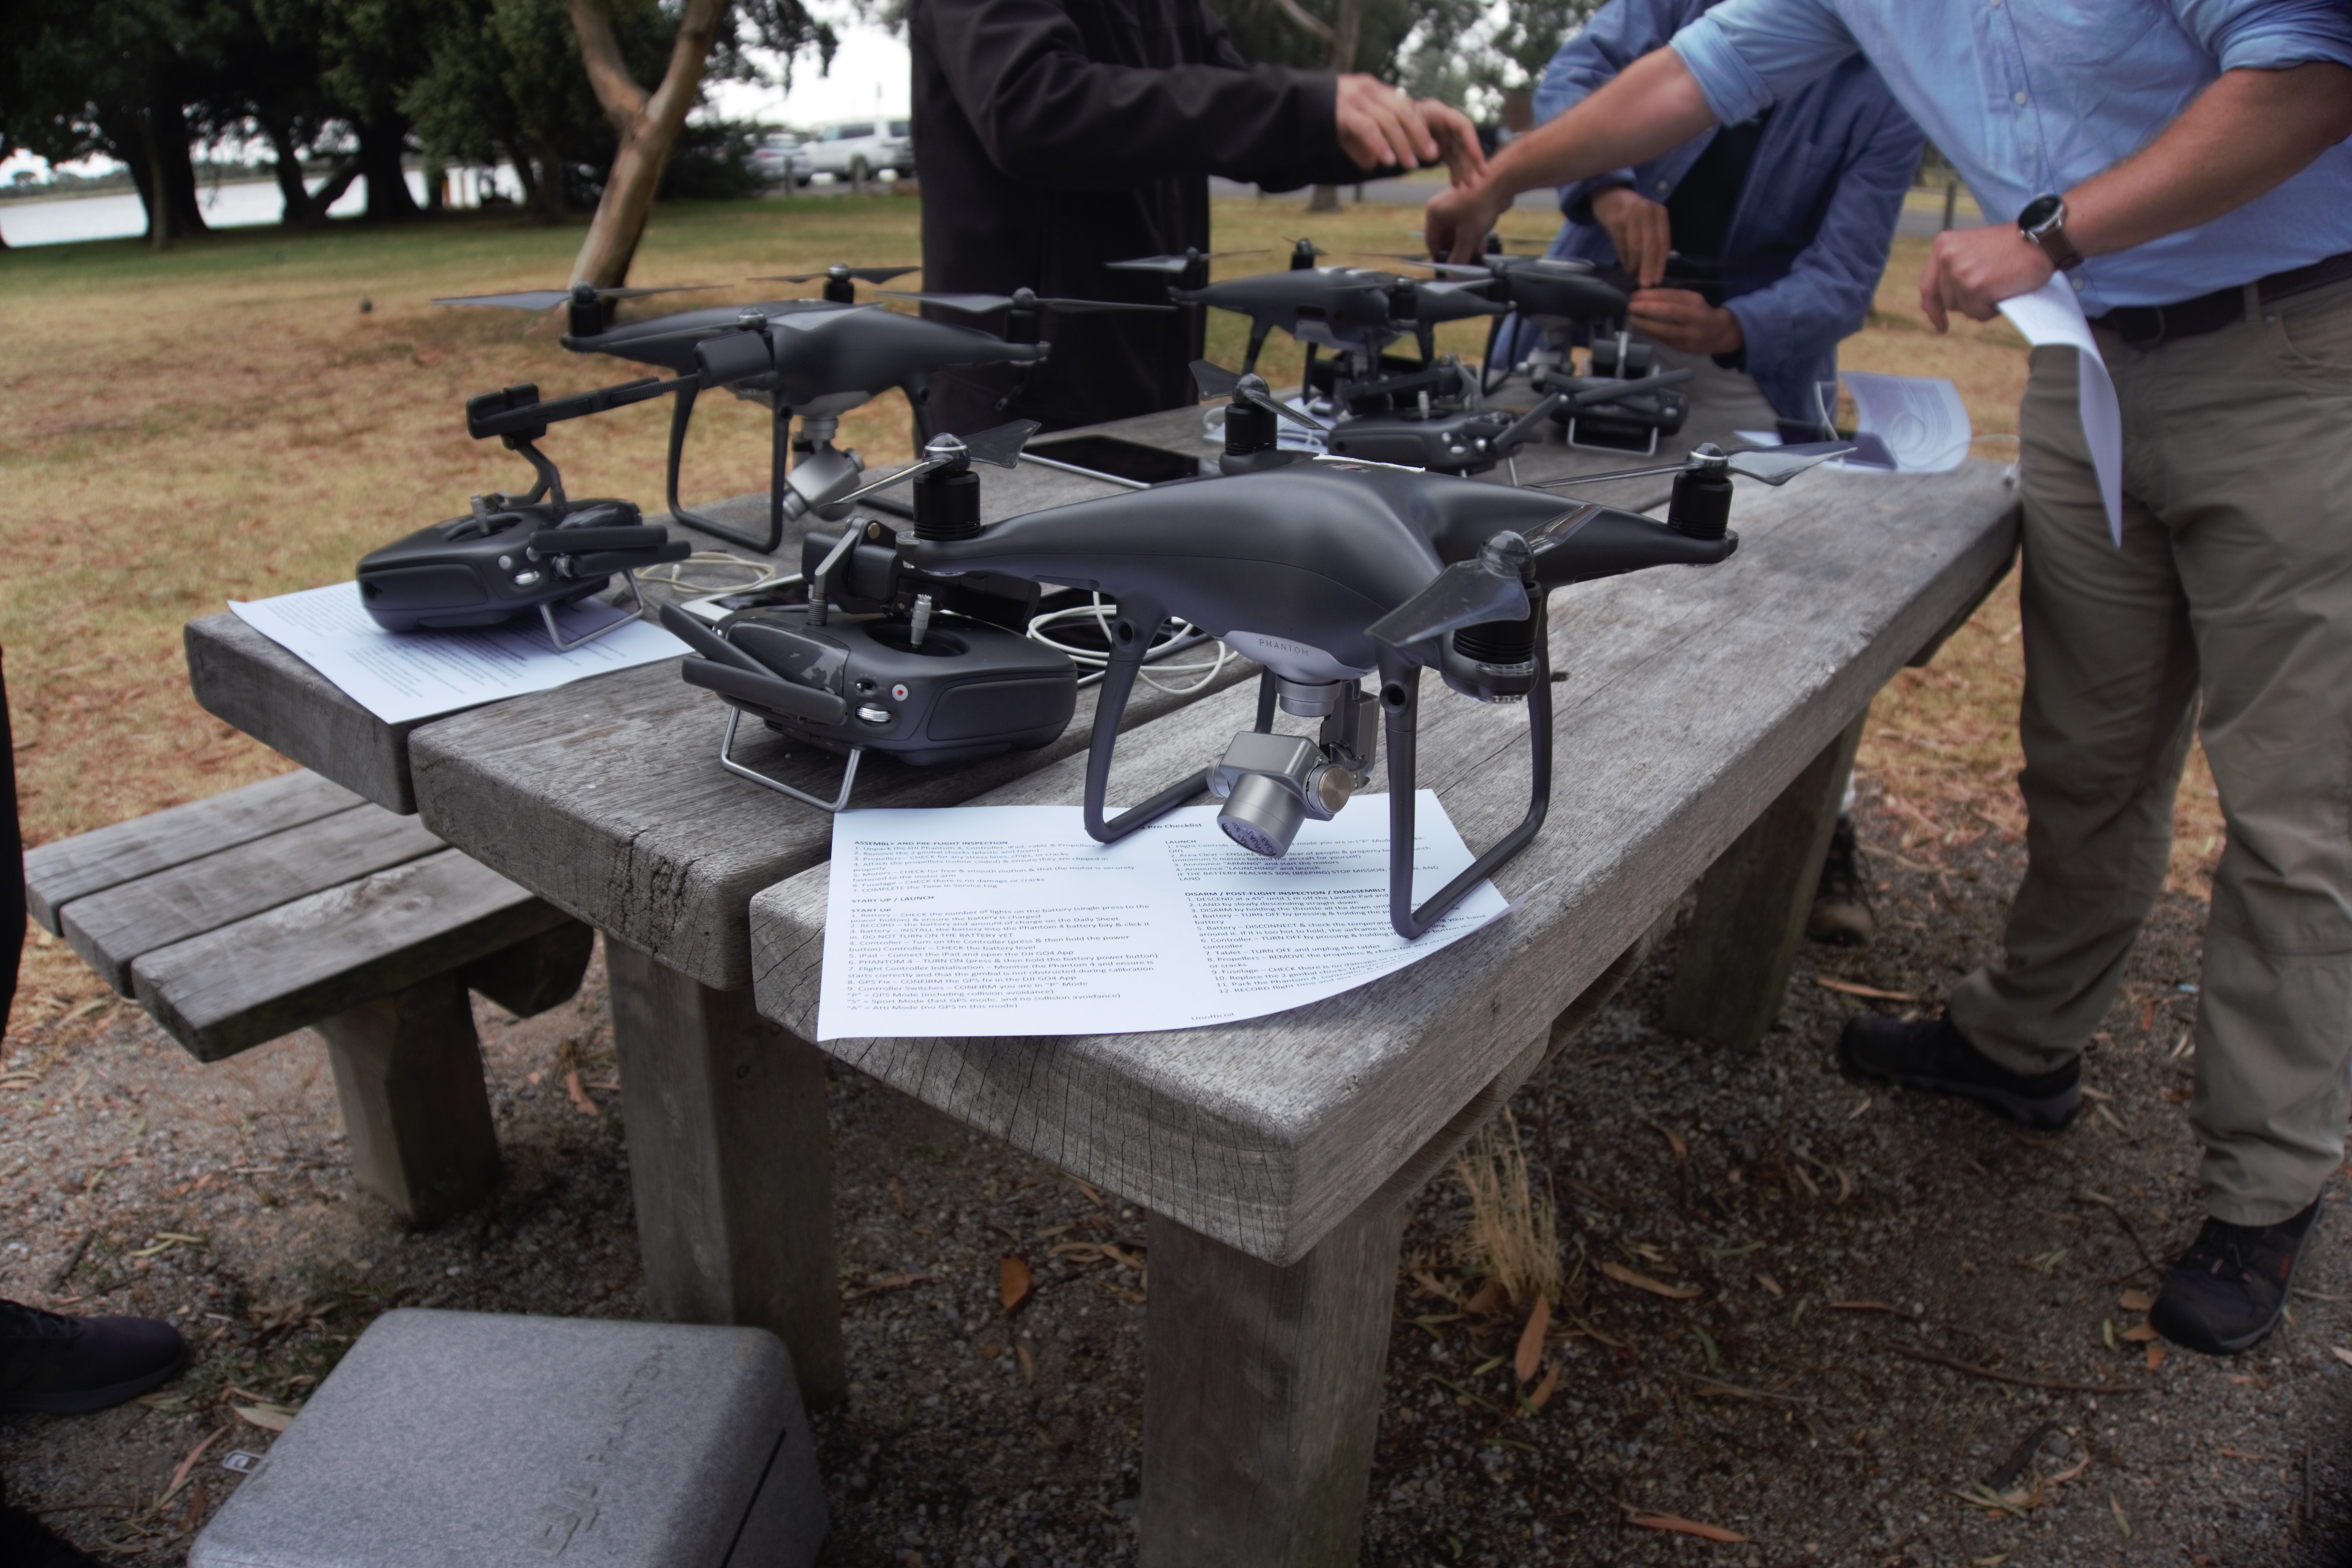 Citizen scientists around table with drones